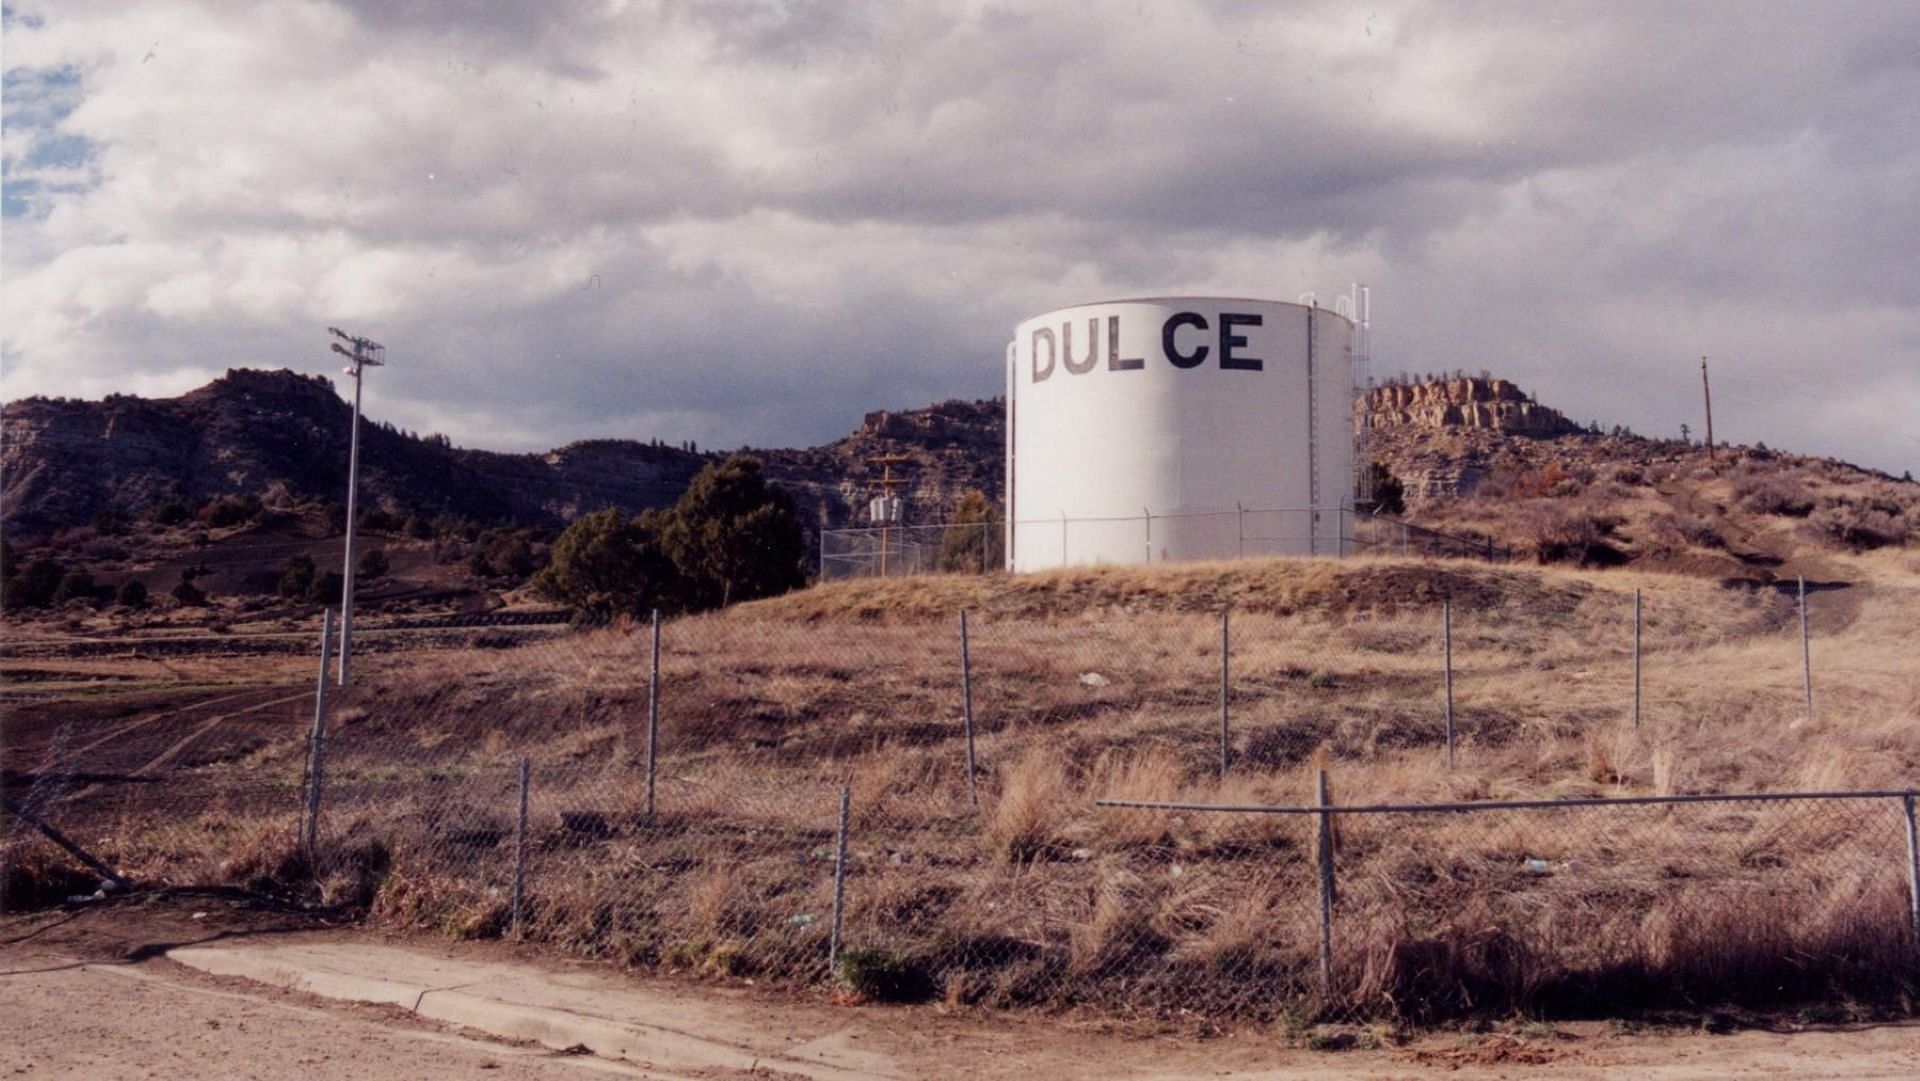 The town of Dulce (Image via clui.org)